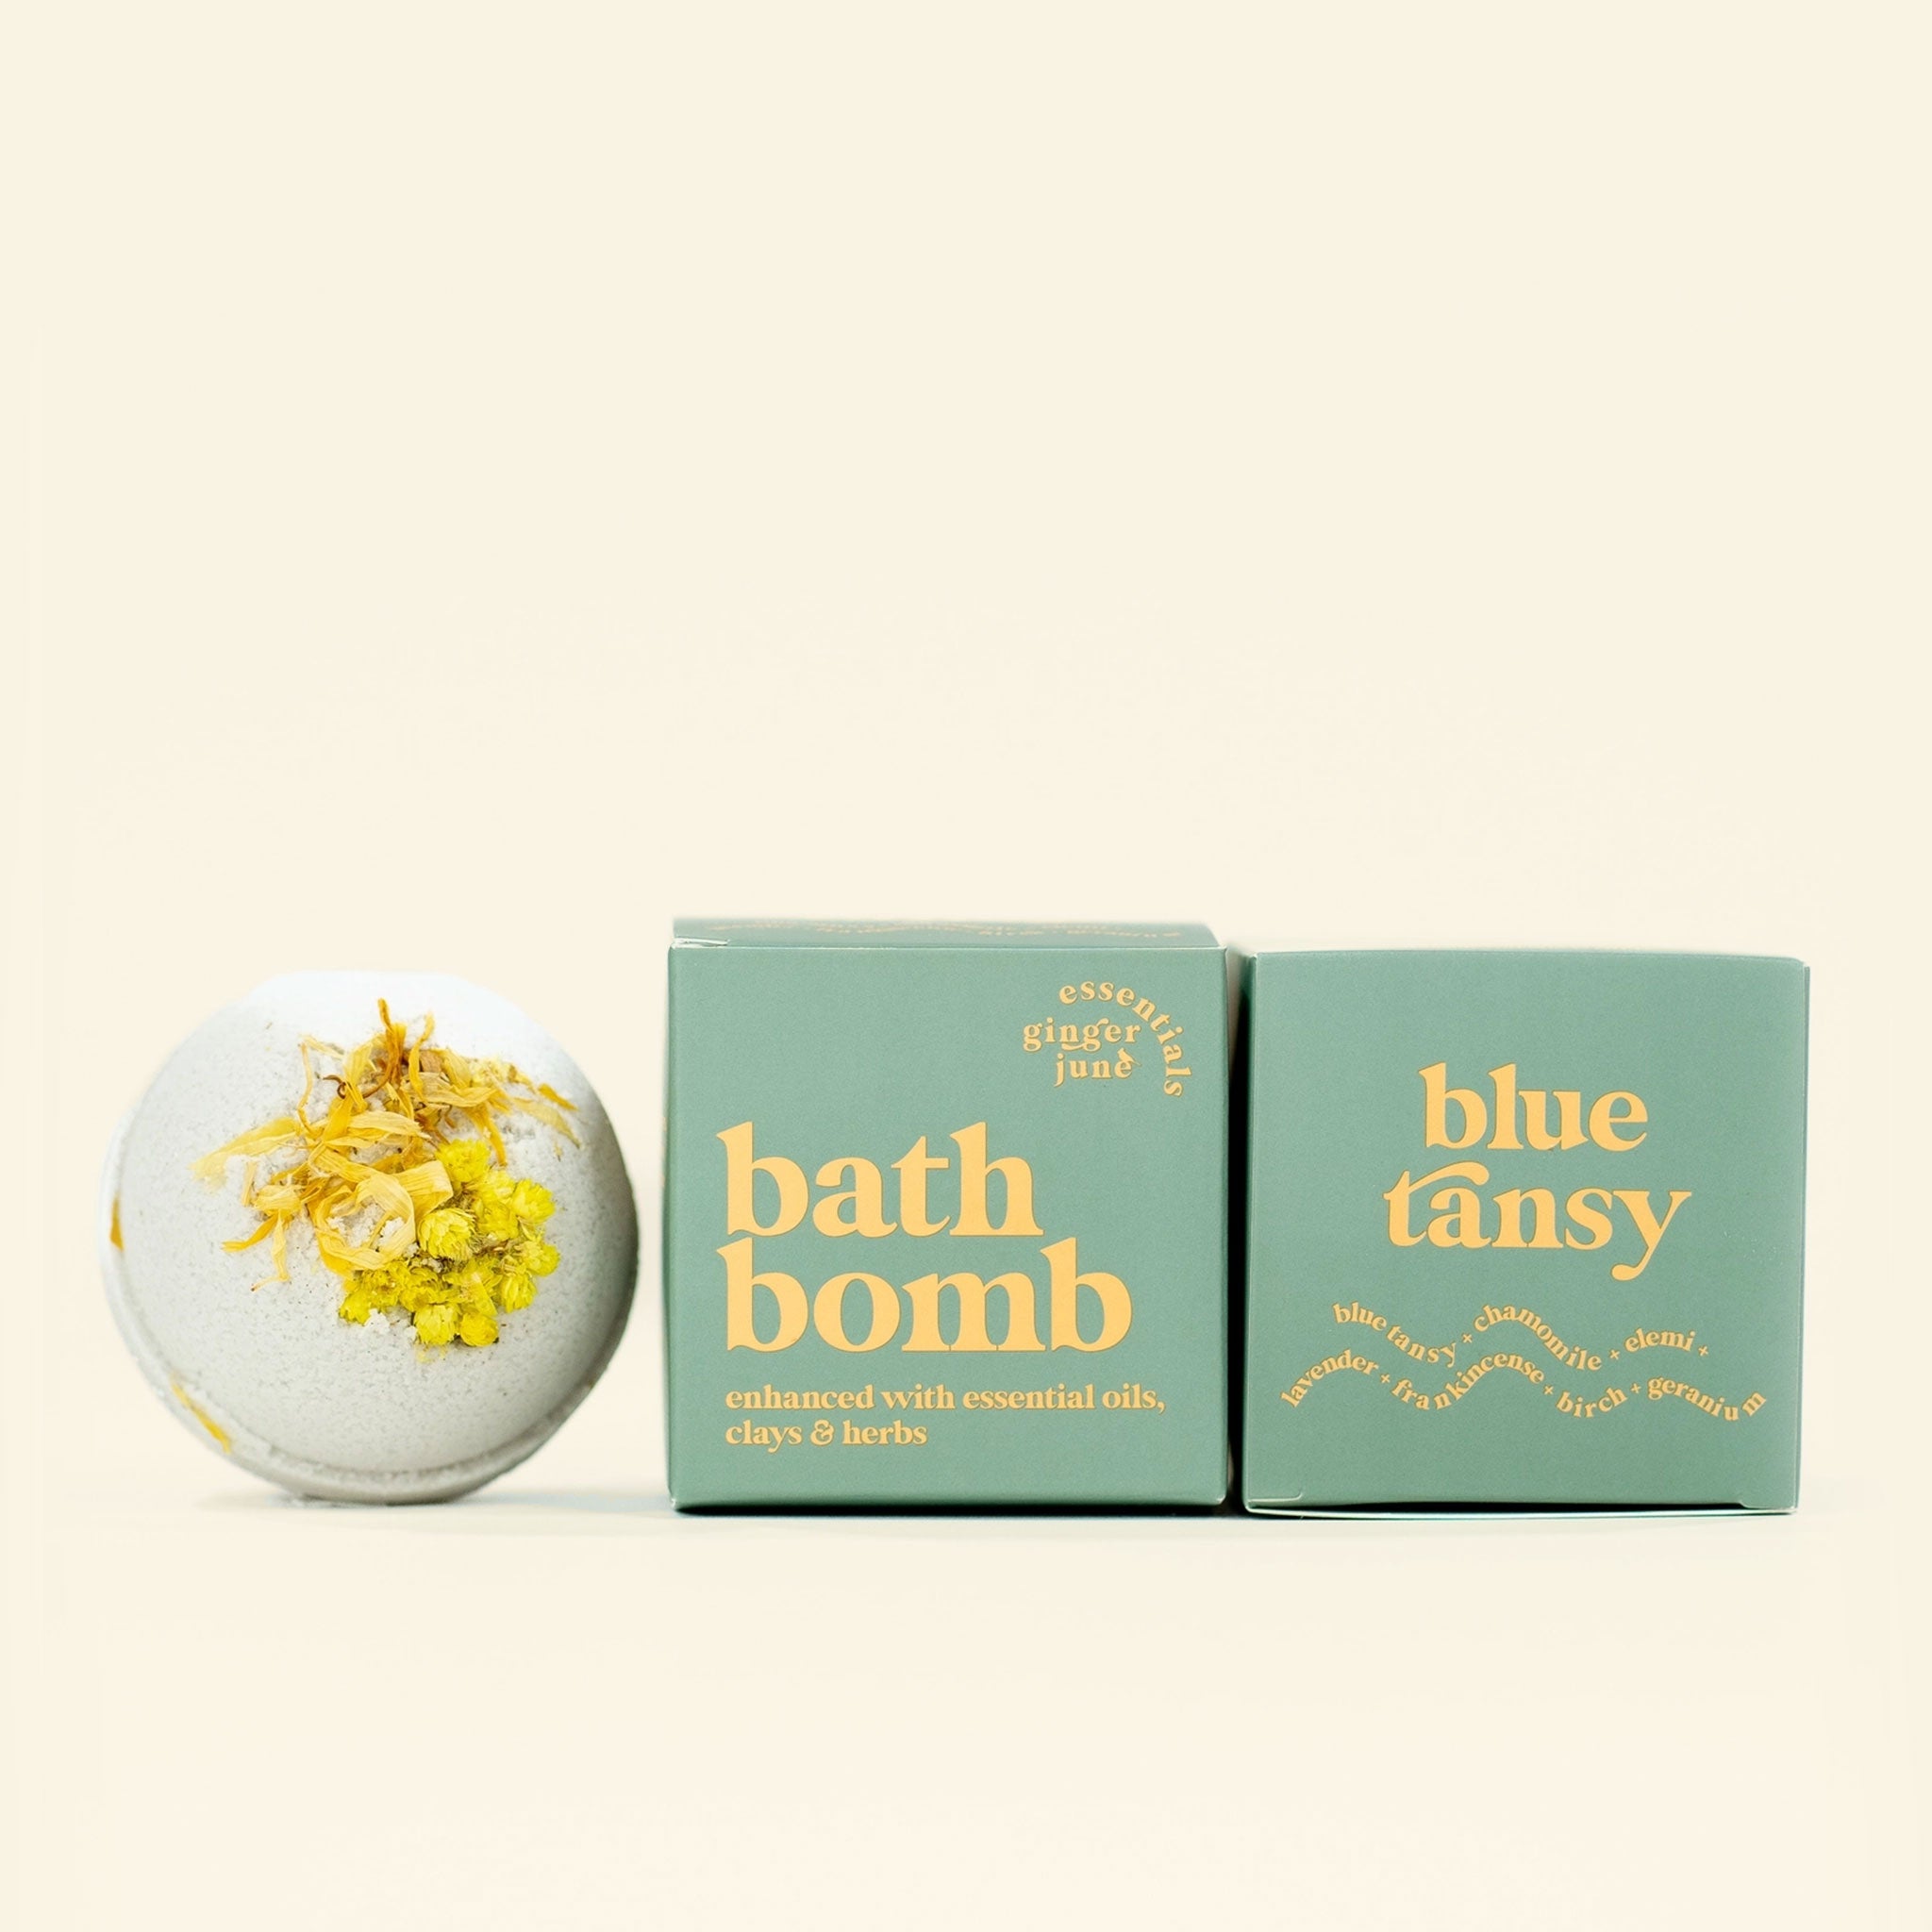 On a neutral background is a green bath bomb with a green box next to it that reads, &quot;bath bomb enhanced with essential oils, clays &amp; herbs&quot;